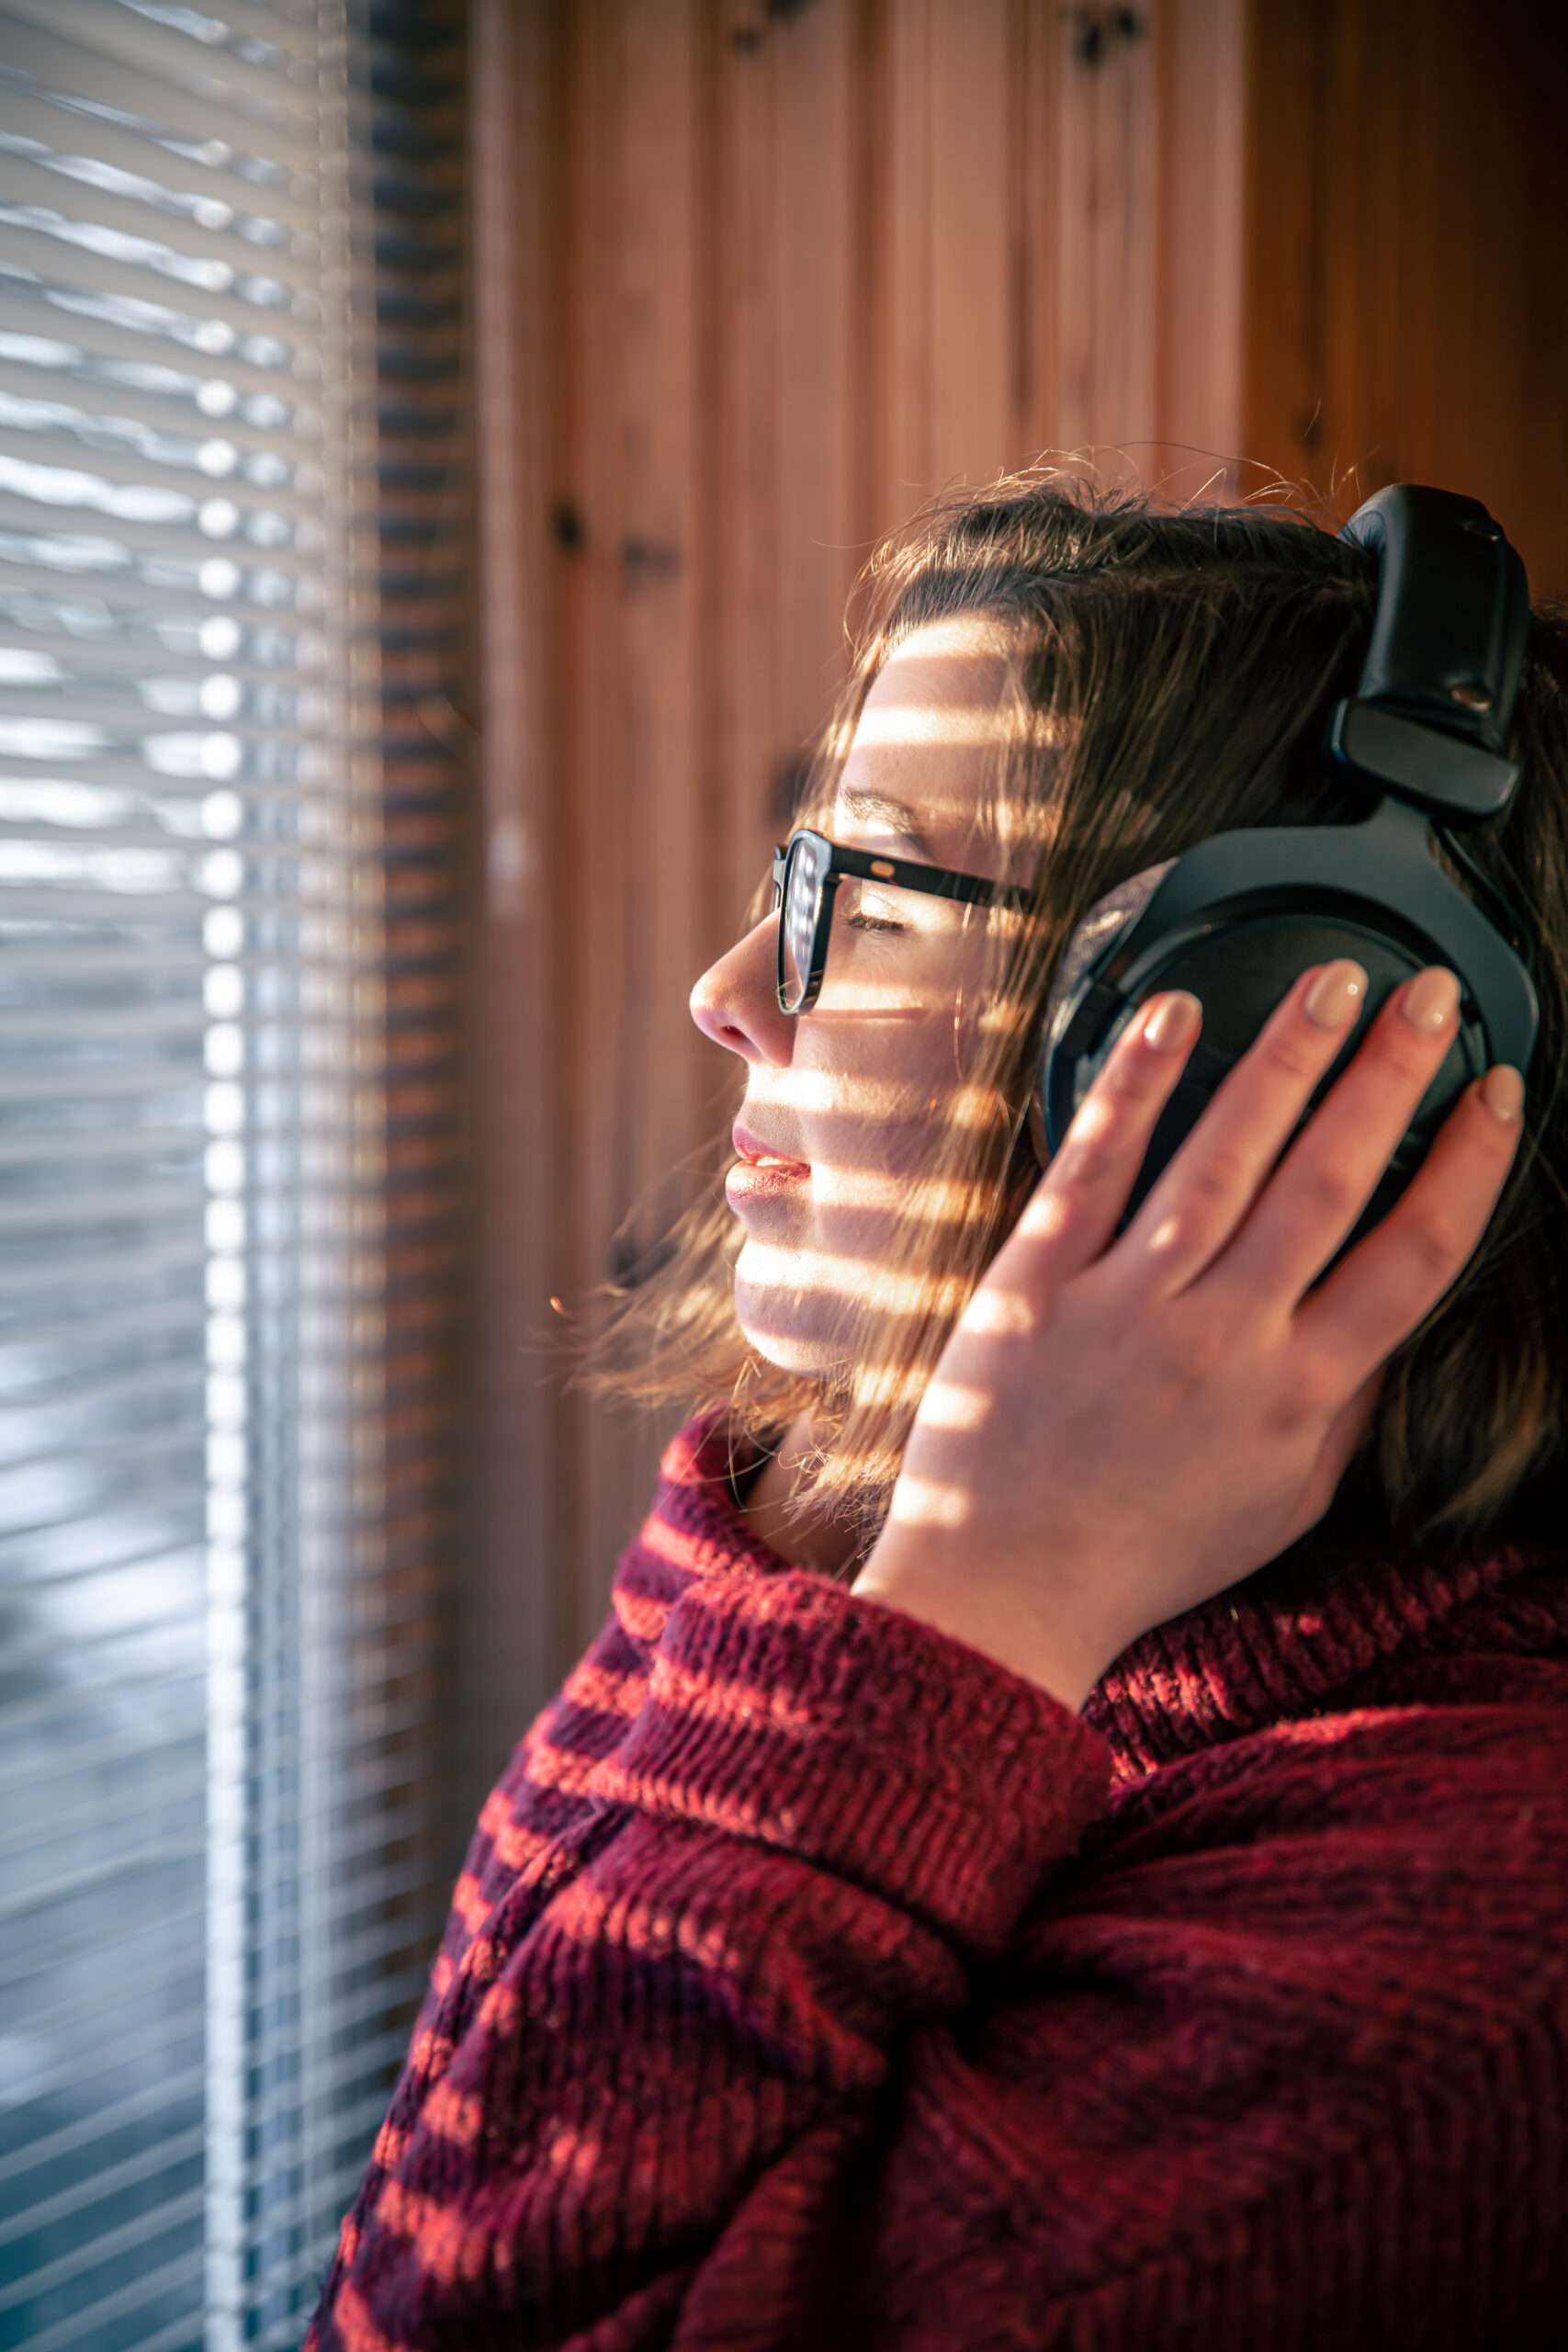 A young woman enjoys listening to music on headphones early in the morning in the sunlight through the blinds on the window, beautiful shadows.